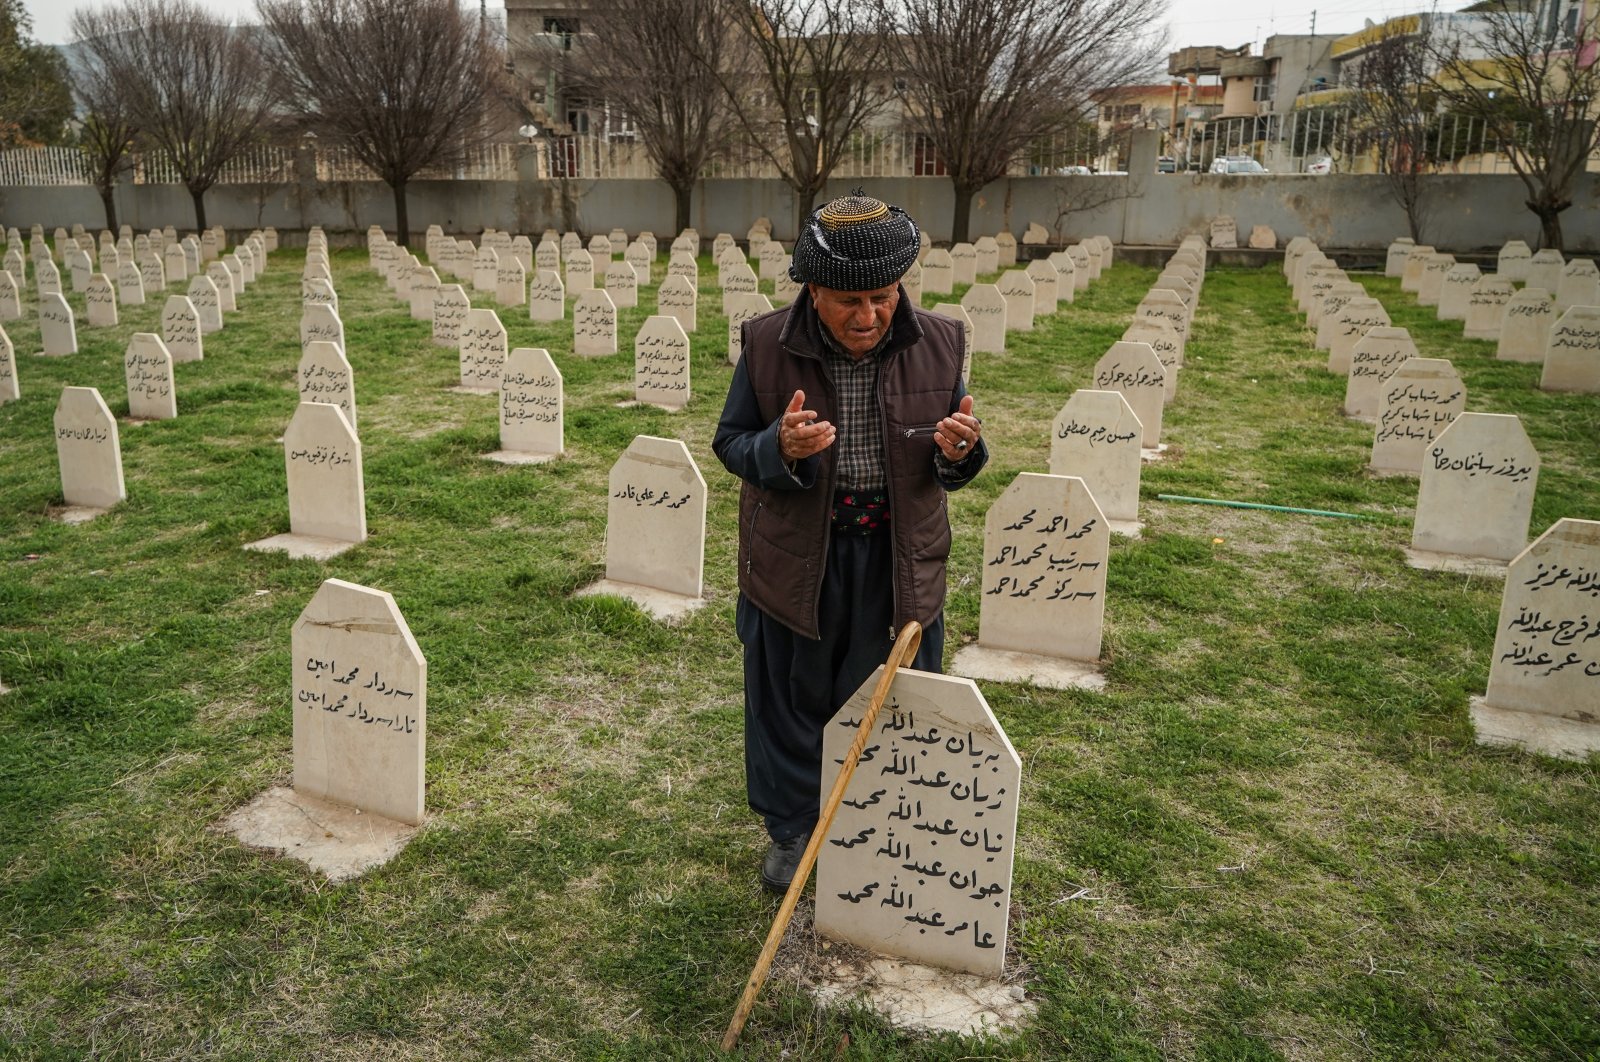 A man visits the grave of his lost ones at Halabja Cemetery on the 33rd anniversary of the Halabja chemical attack, which killed nearly 5,000 people and injured about 10,000, most of them civilians. (Reuters Photo)